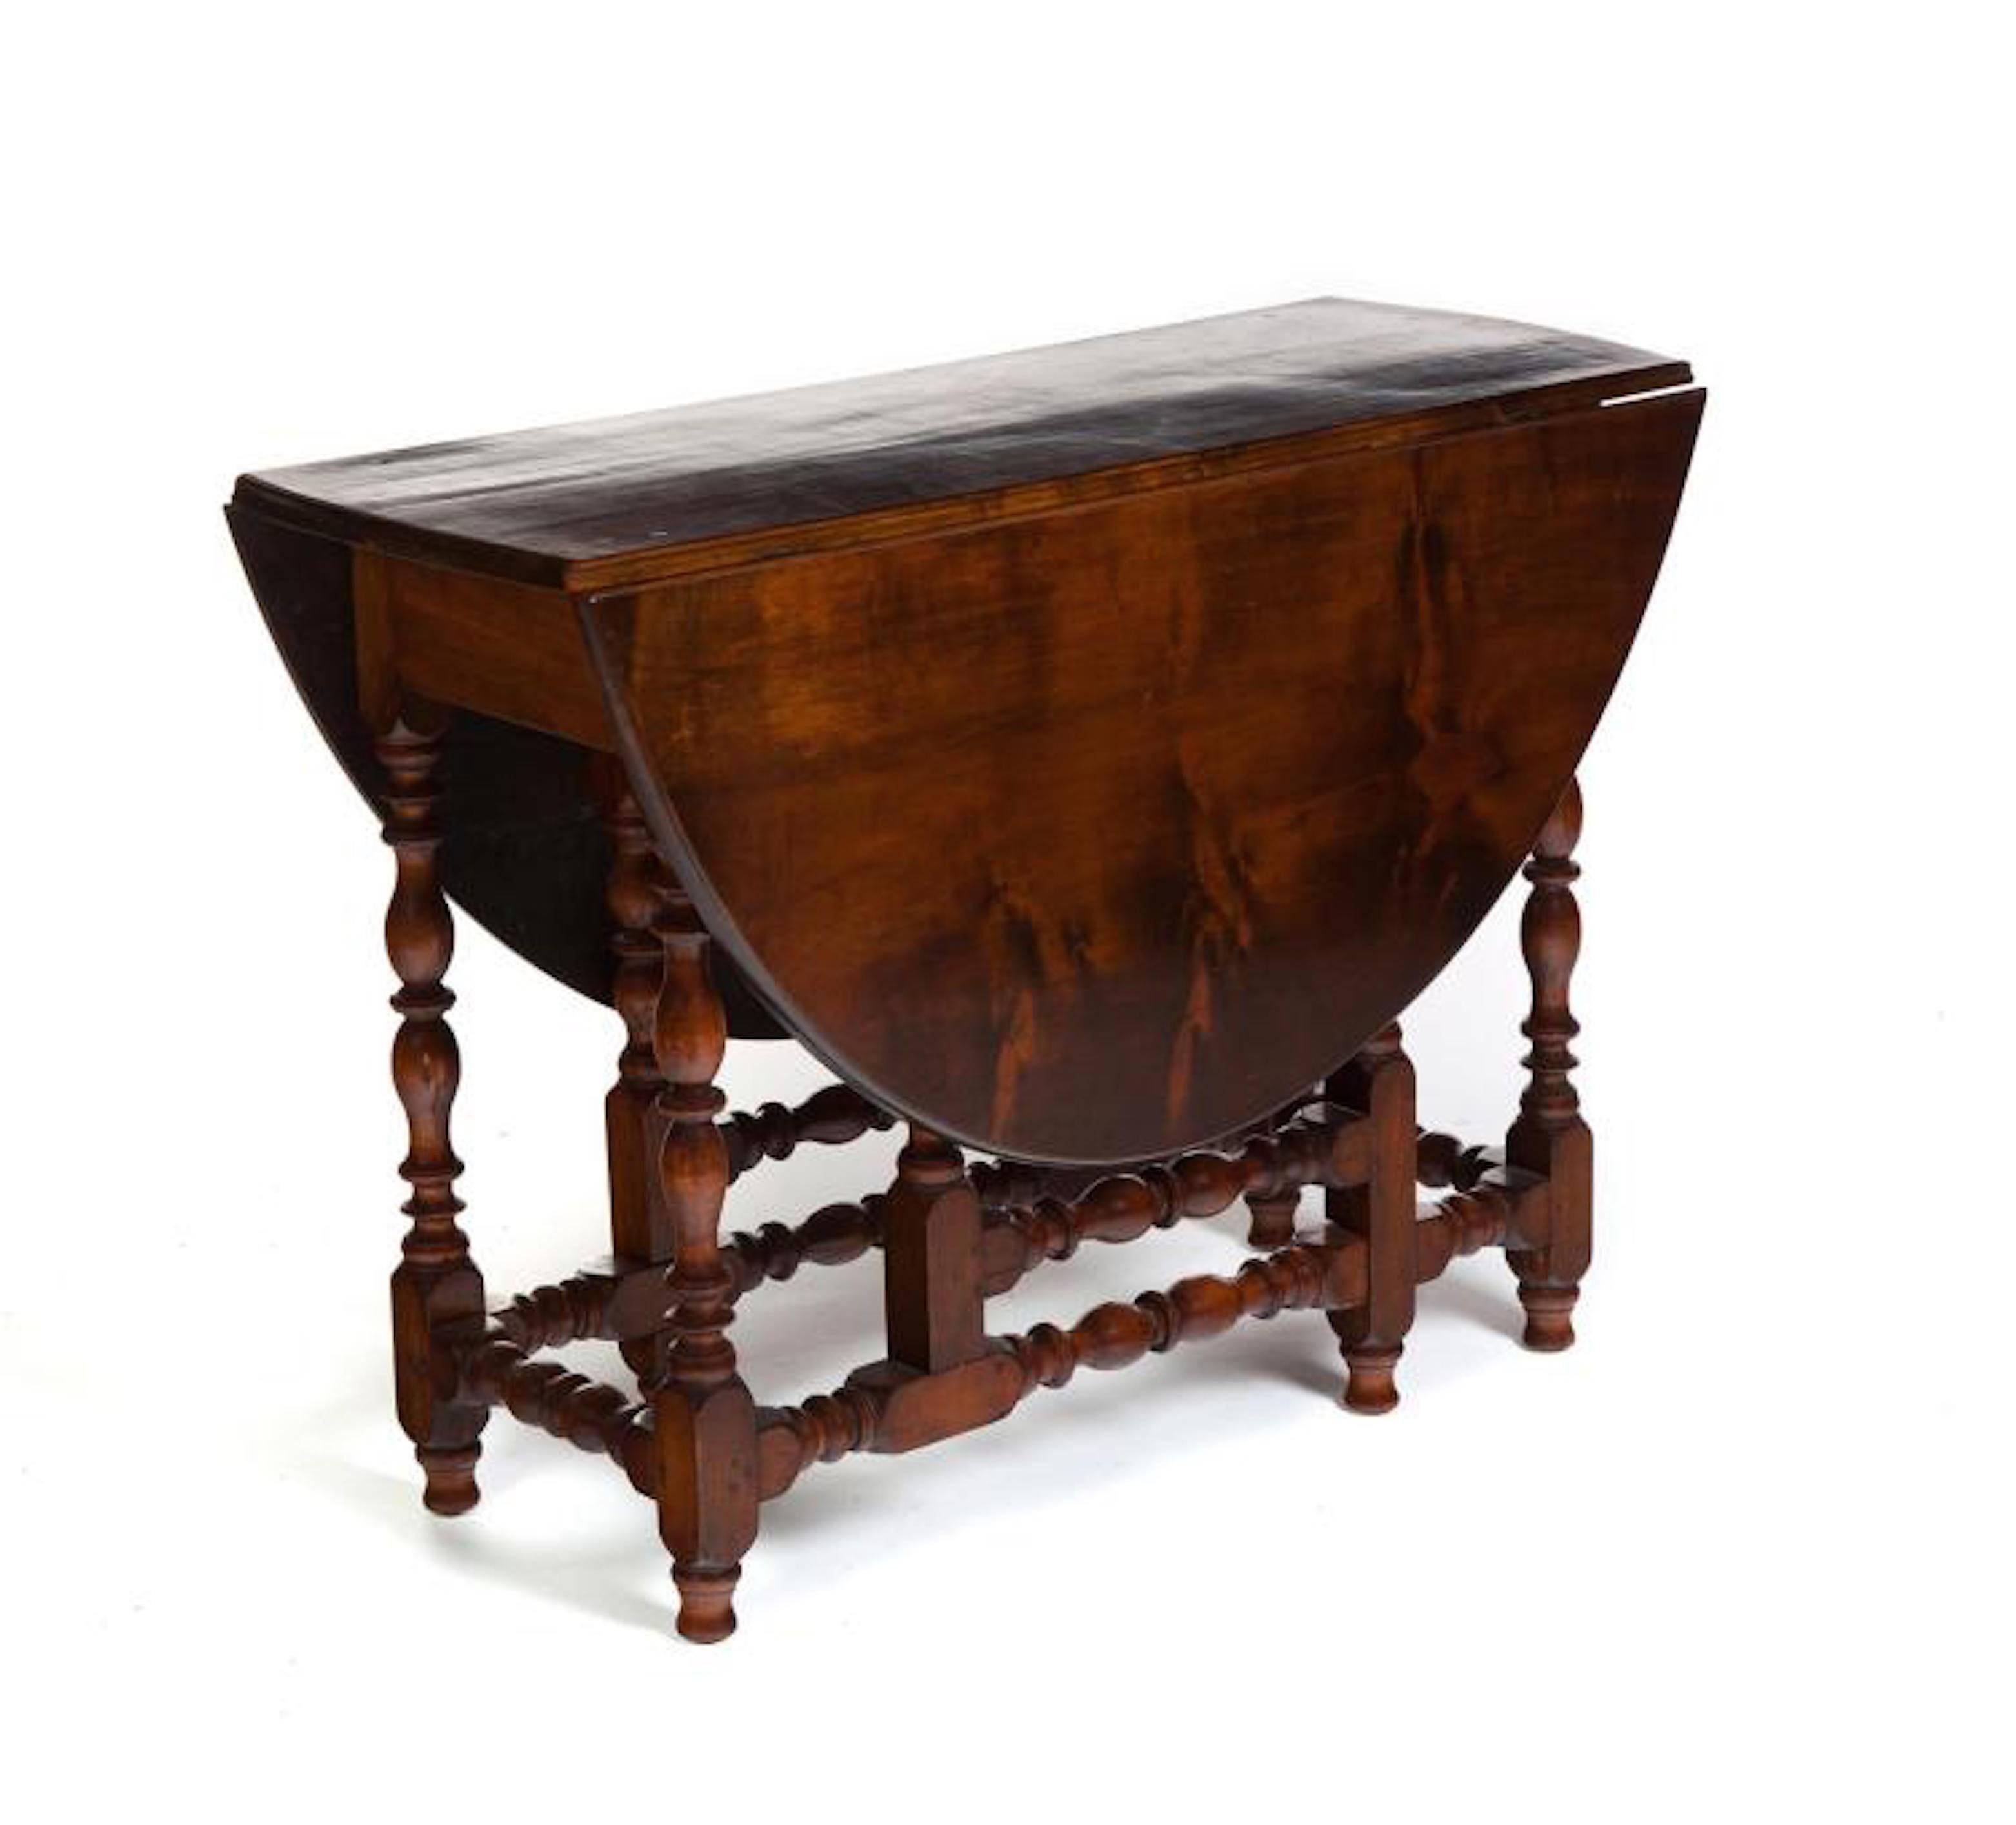 Good turnings, shaped leaves and single drawer with wide dovetailing.